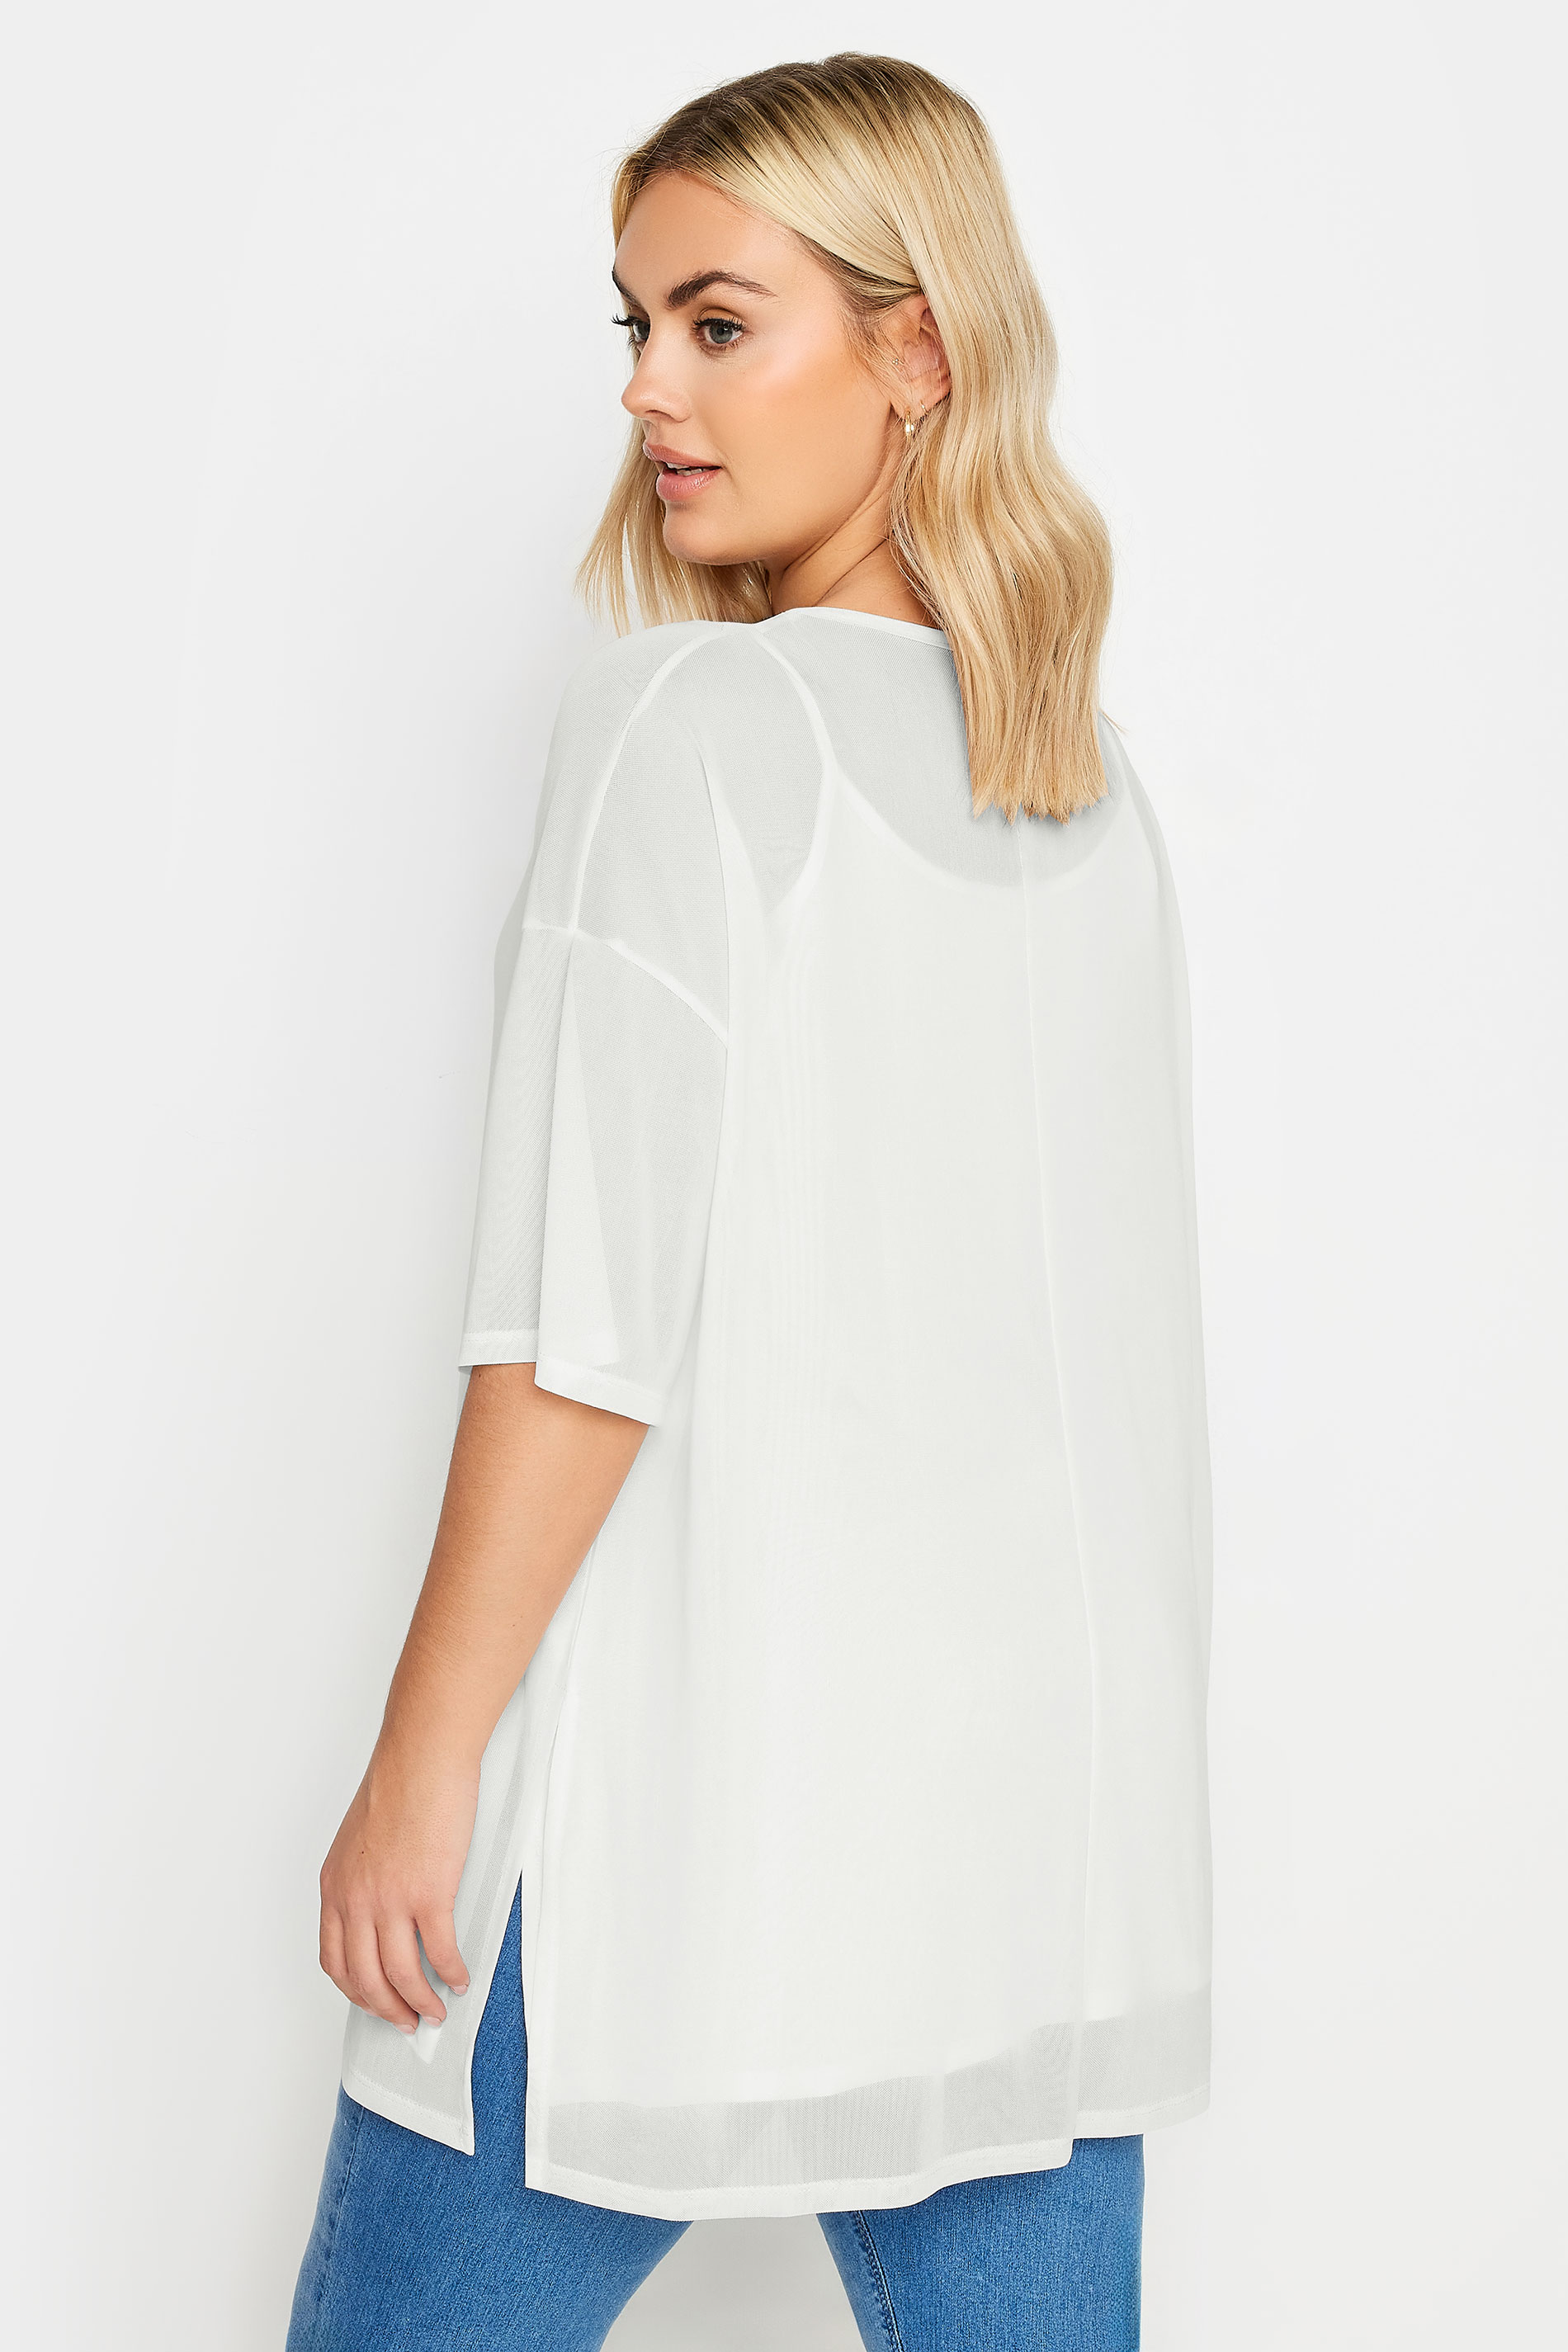 YOURS Plus Size White Oversized Mesh Top | Yours Clothing 3